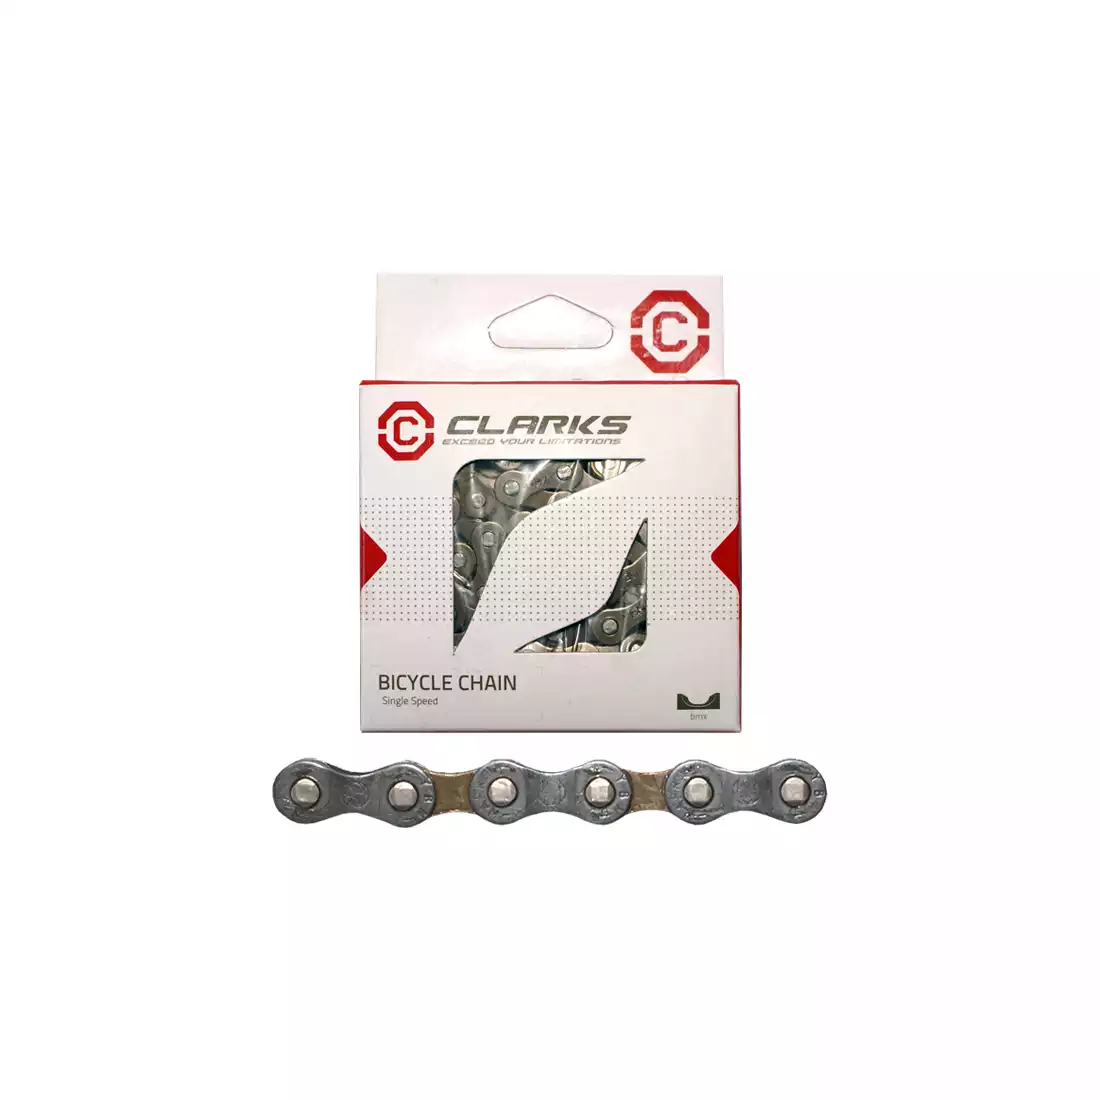 CLARKS C410 Bicycle chain, 1-speed, 116 links, silver